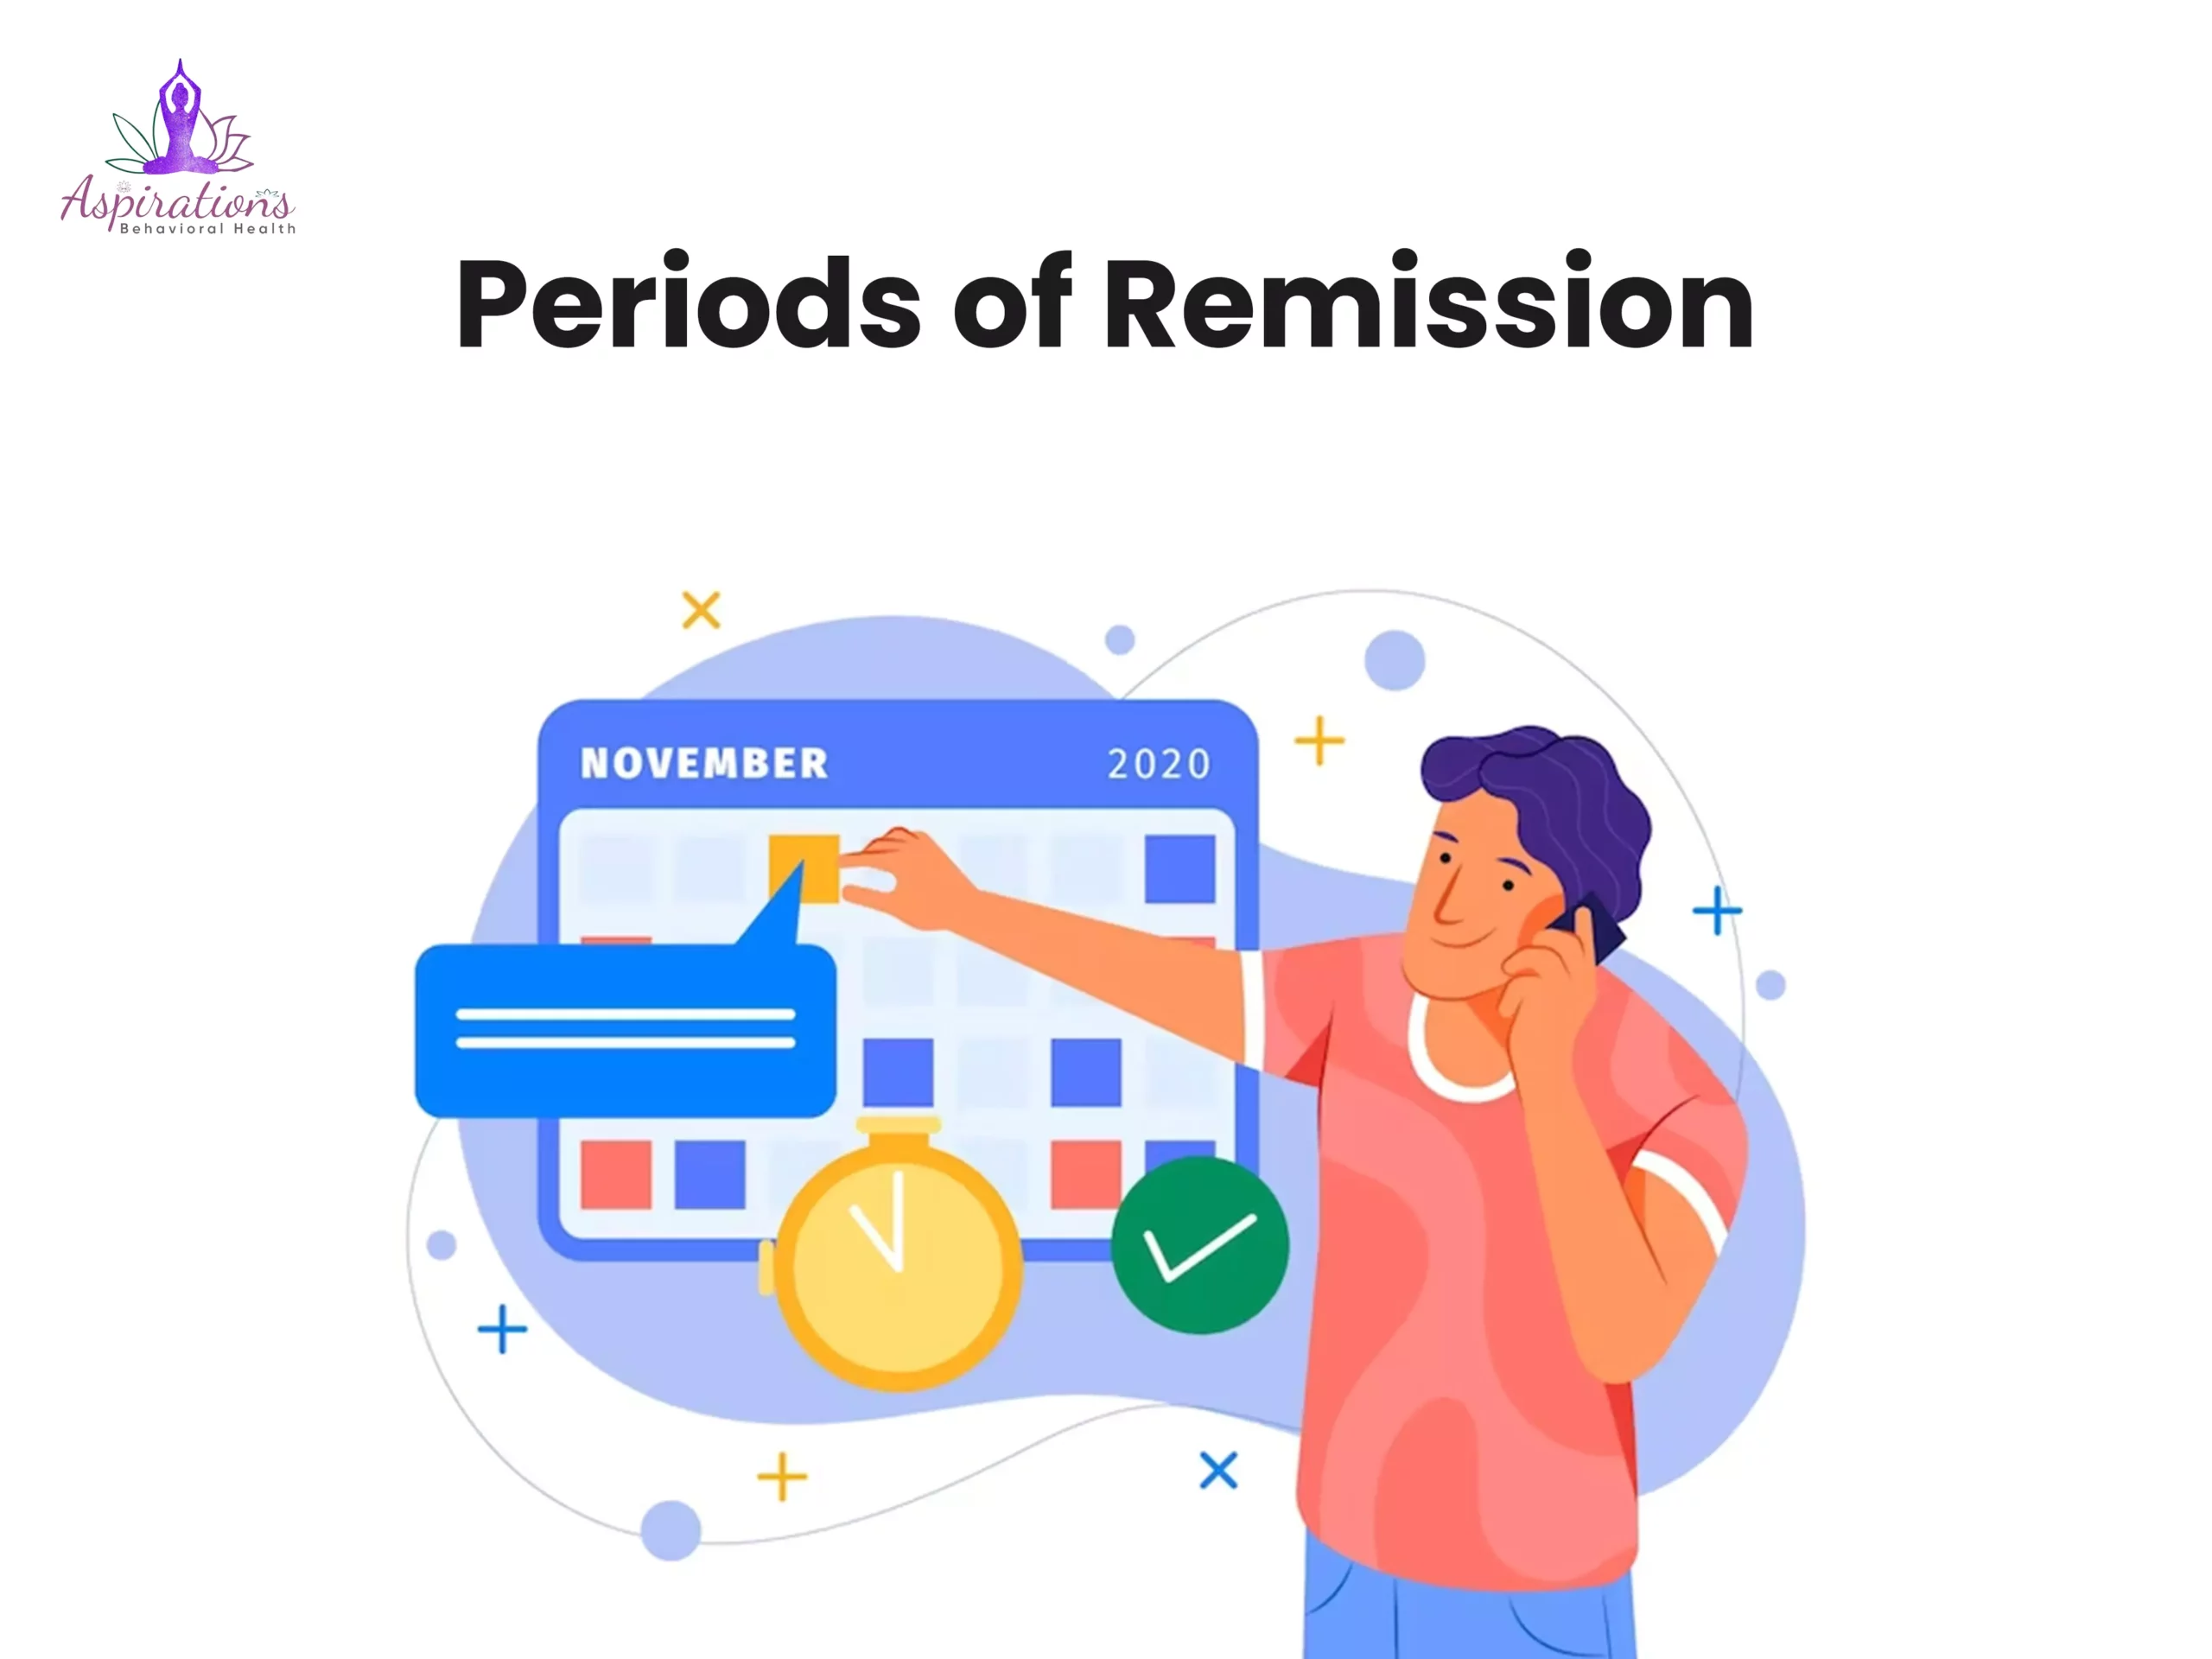 Periods of Remission